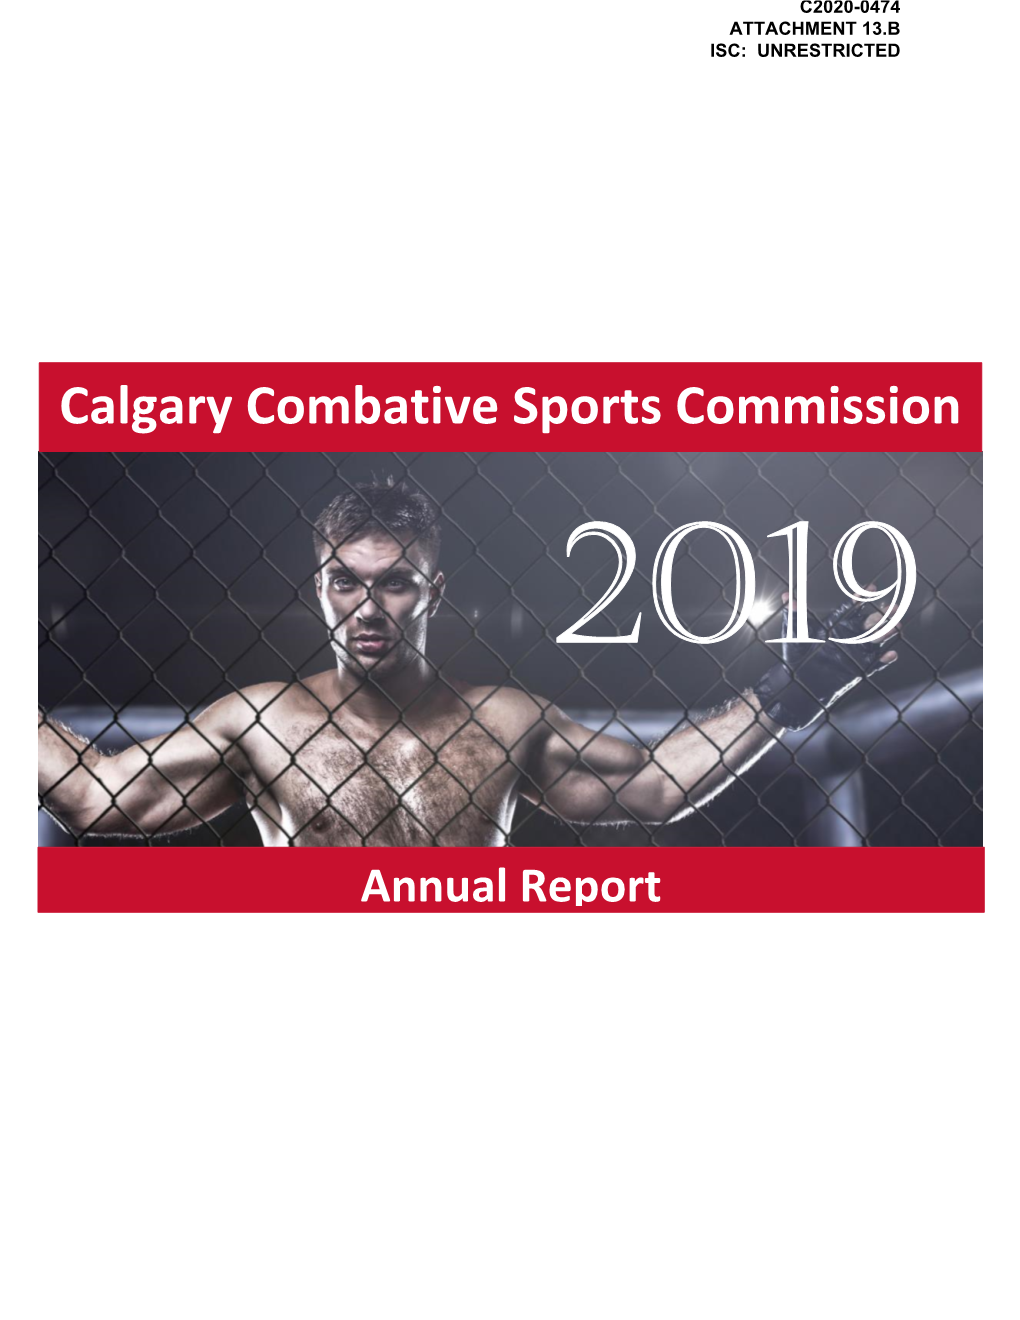 2018 Calgary Combative Sports Commission Annual Report-V28